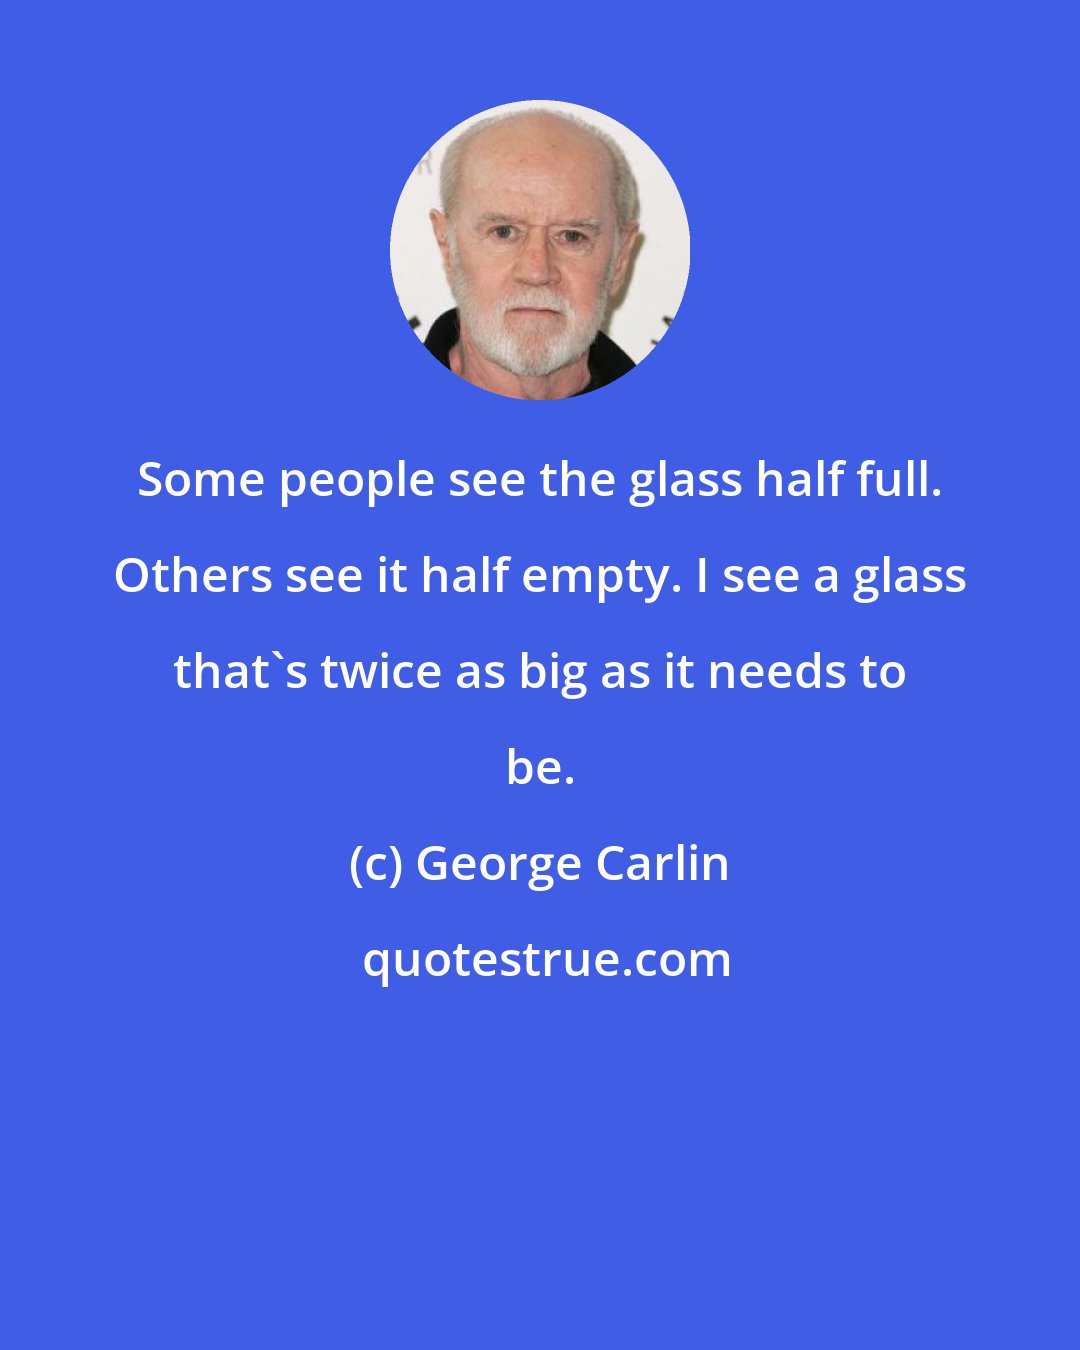 George Carlin: Some people see the glass half full. Others see it half empty. I see a glass that's twice as big as it needs to be.